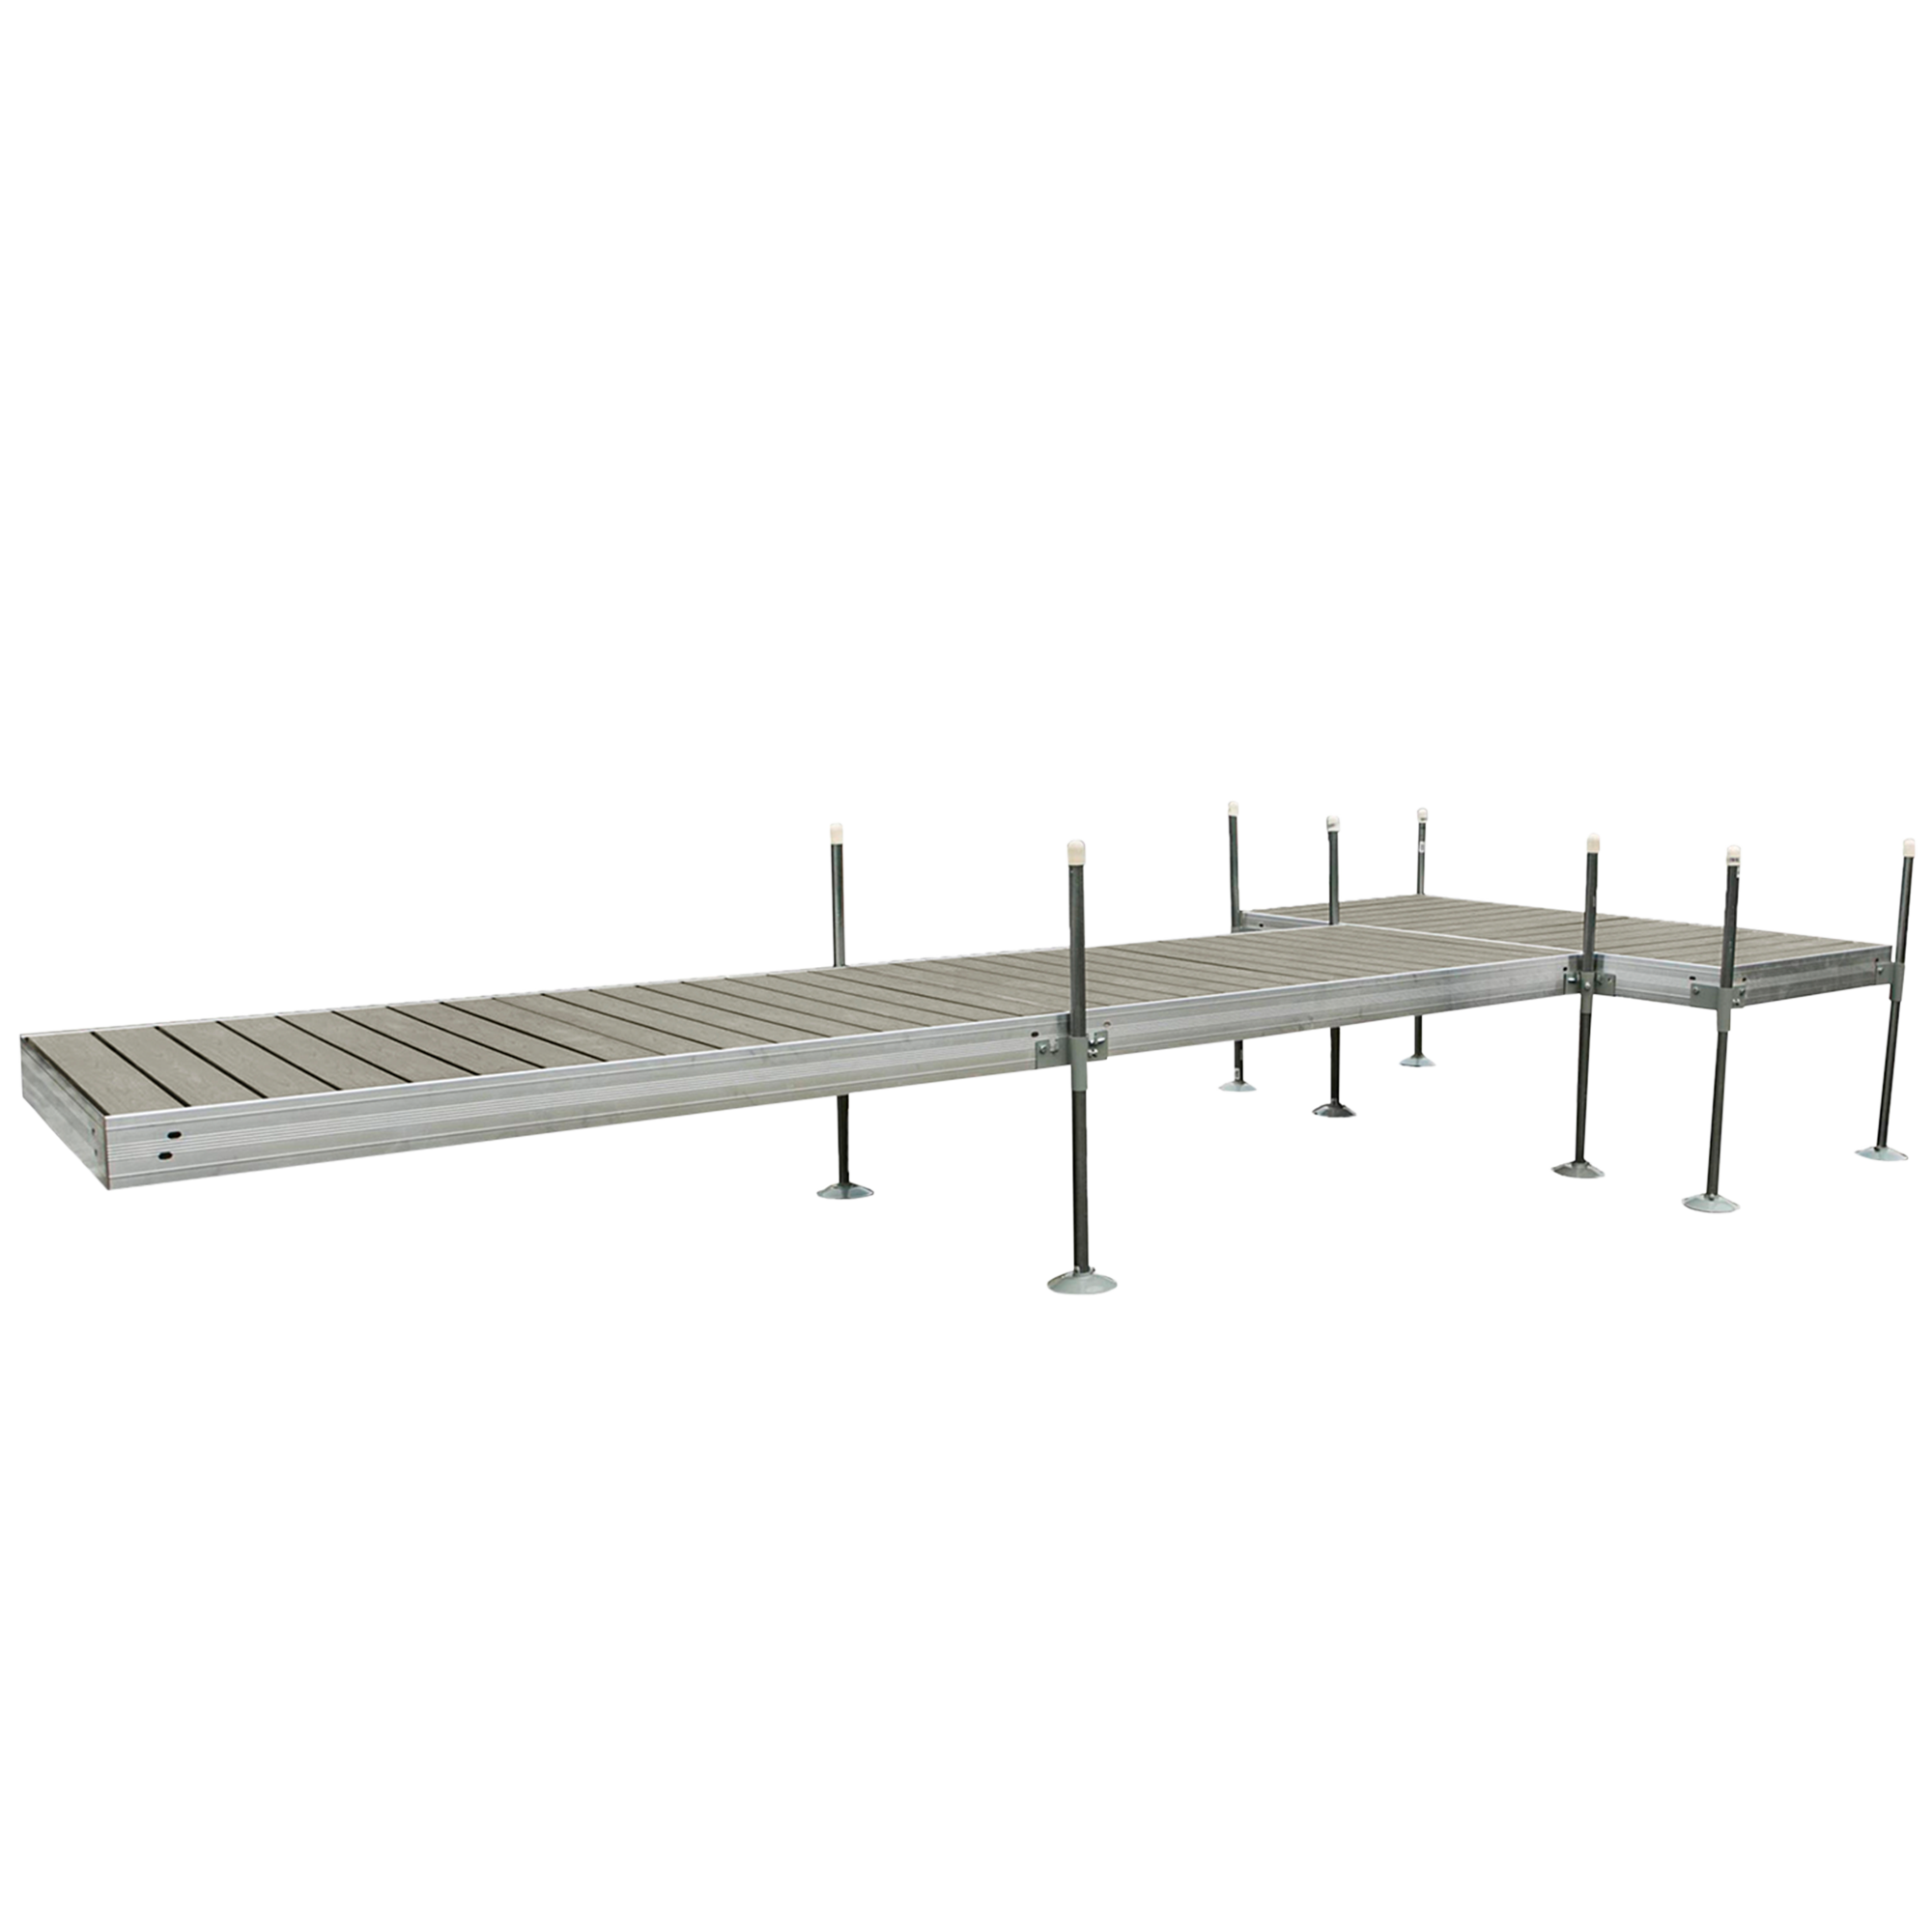 20' T-Shaped Boat Dock System with Aluminum Frame and Gray Composite Decking